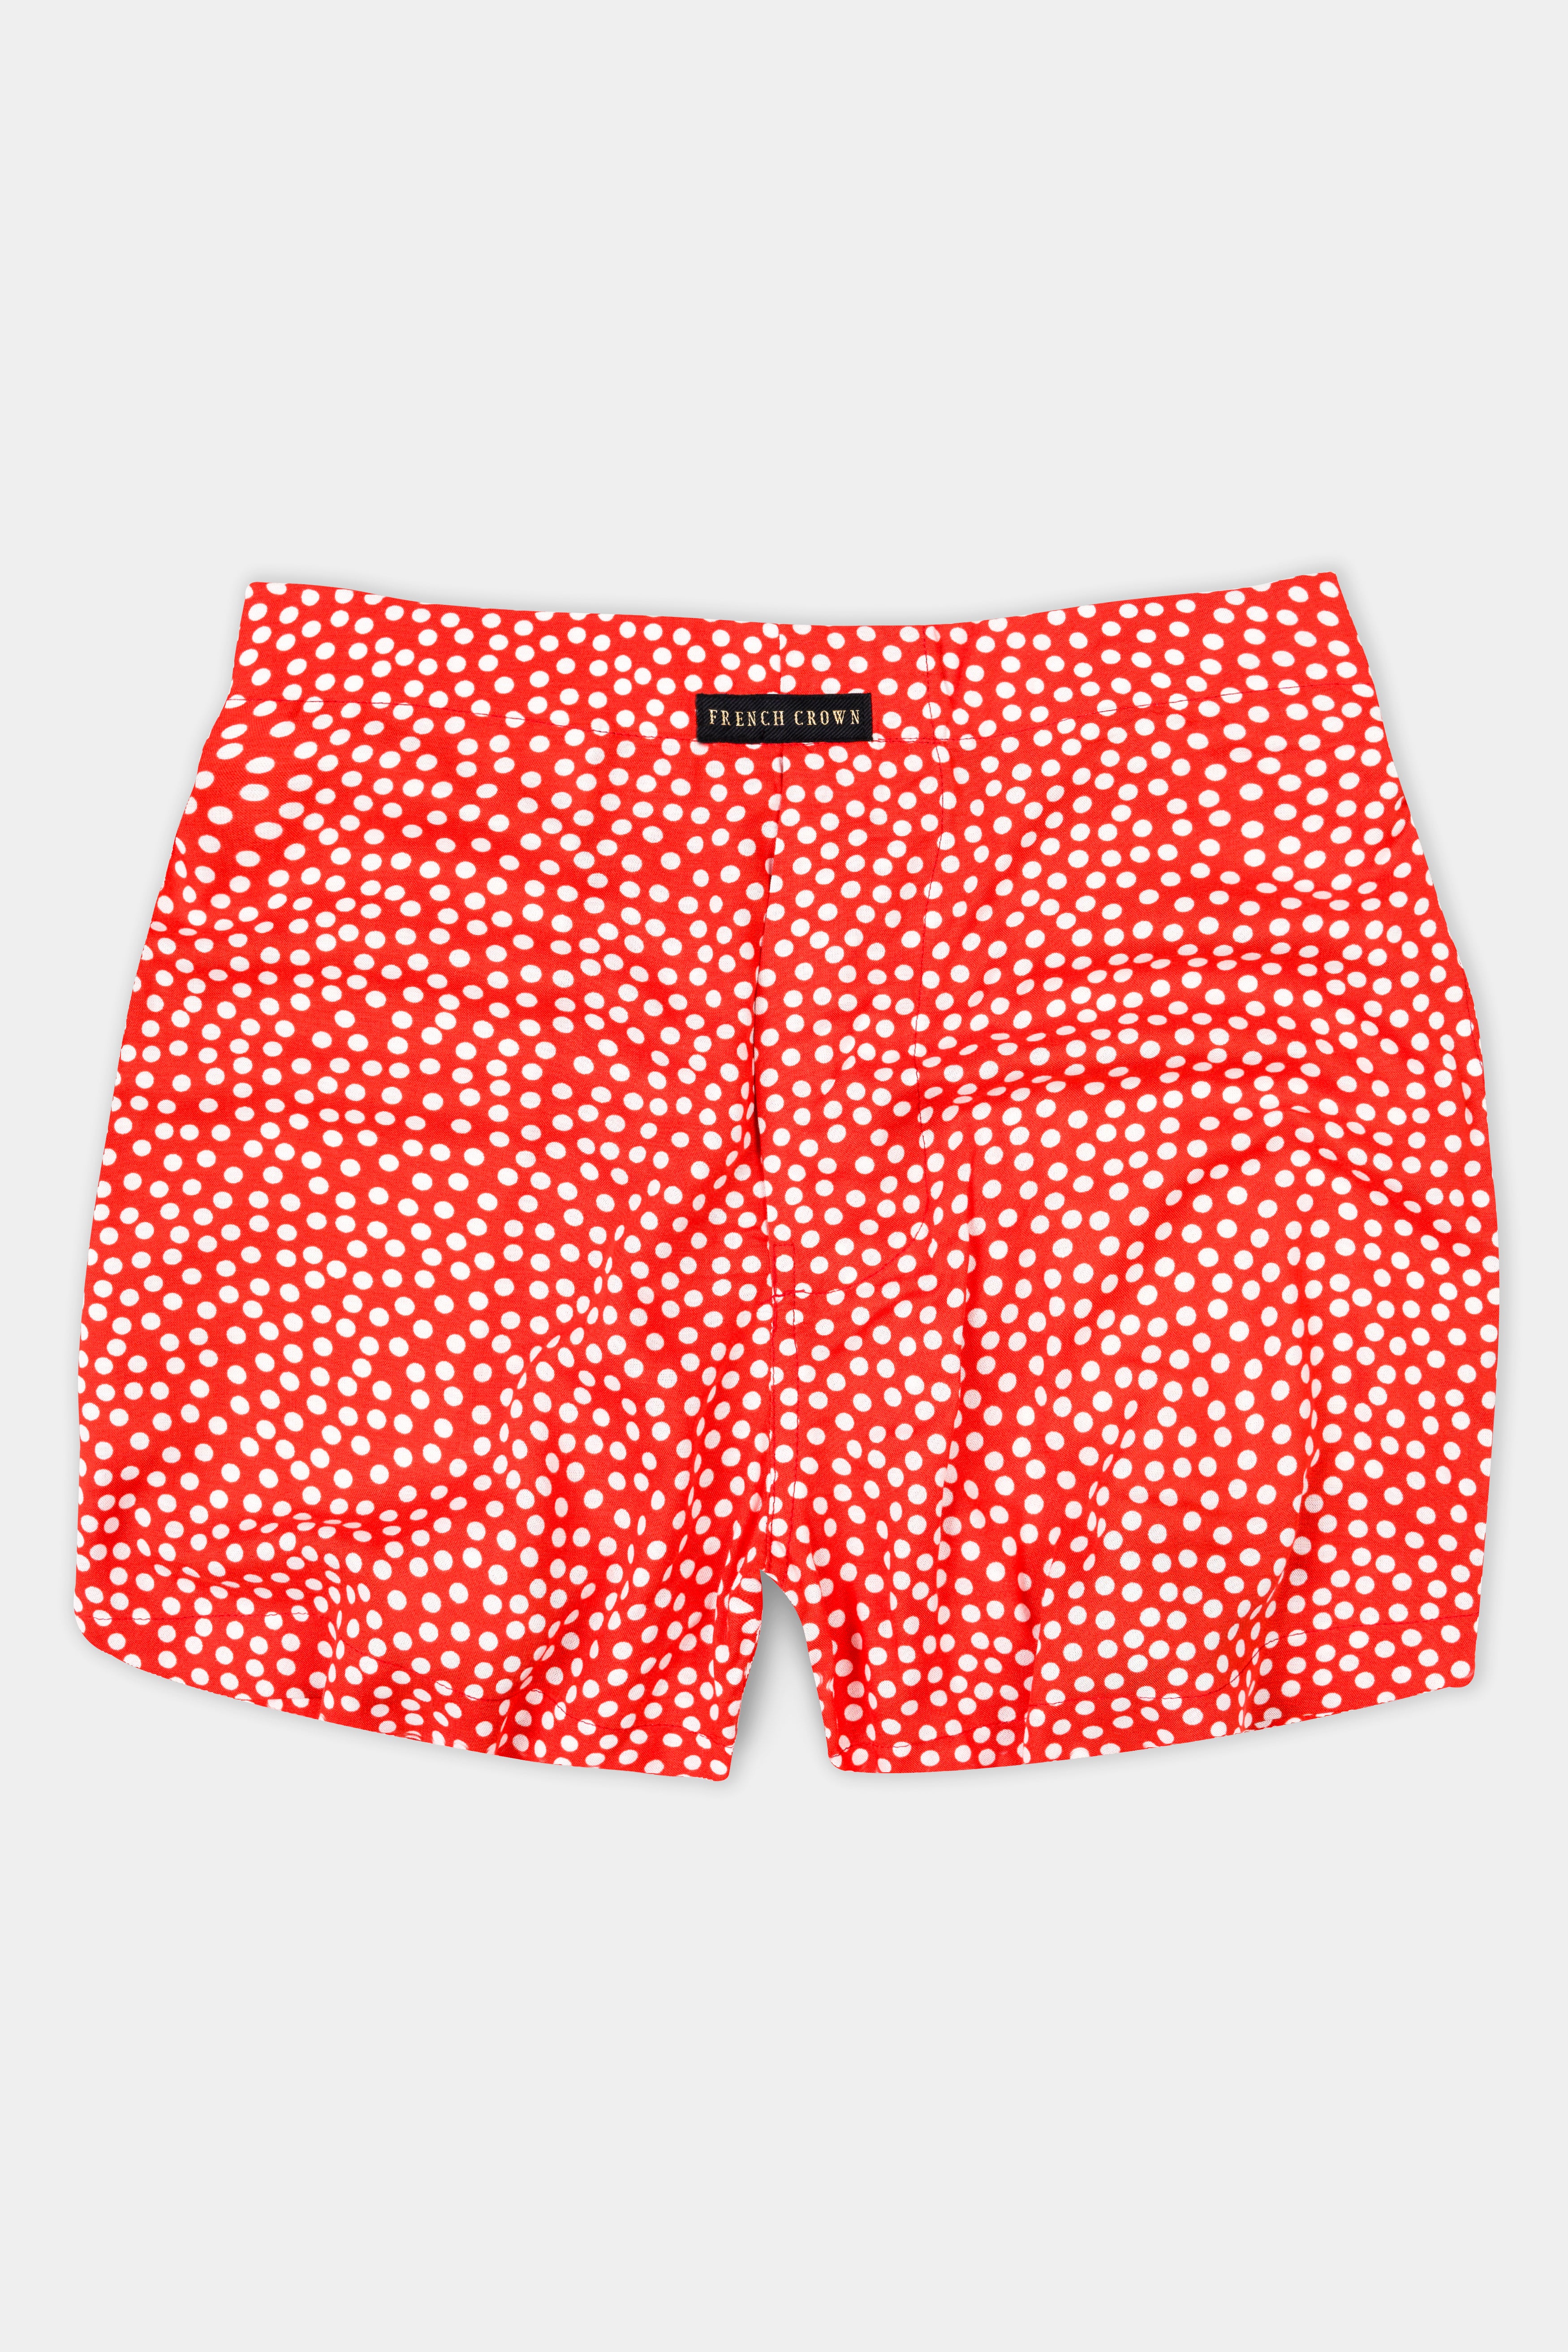 Edgewater Blue Textured Premium Cotton and Cornell Red Polka Dotted Premium Tencel Boxers BX563-BX526-28, BX563-BX526-30, BX563-BX526-32, BX563-BX526-34, BX563-BX526-36, BX563-BX526-38, BX563-BX526-40, BX563-BX526-42, BX563-BX526-44